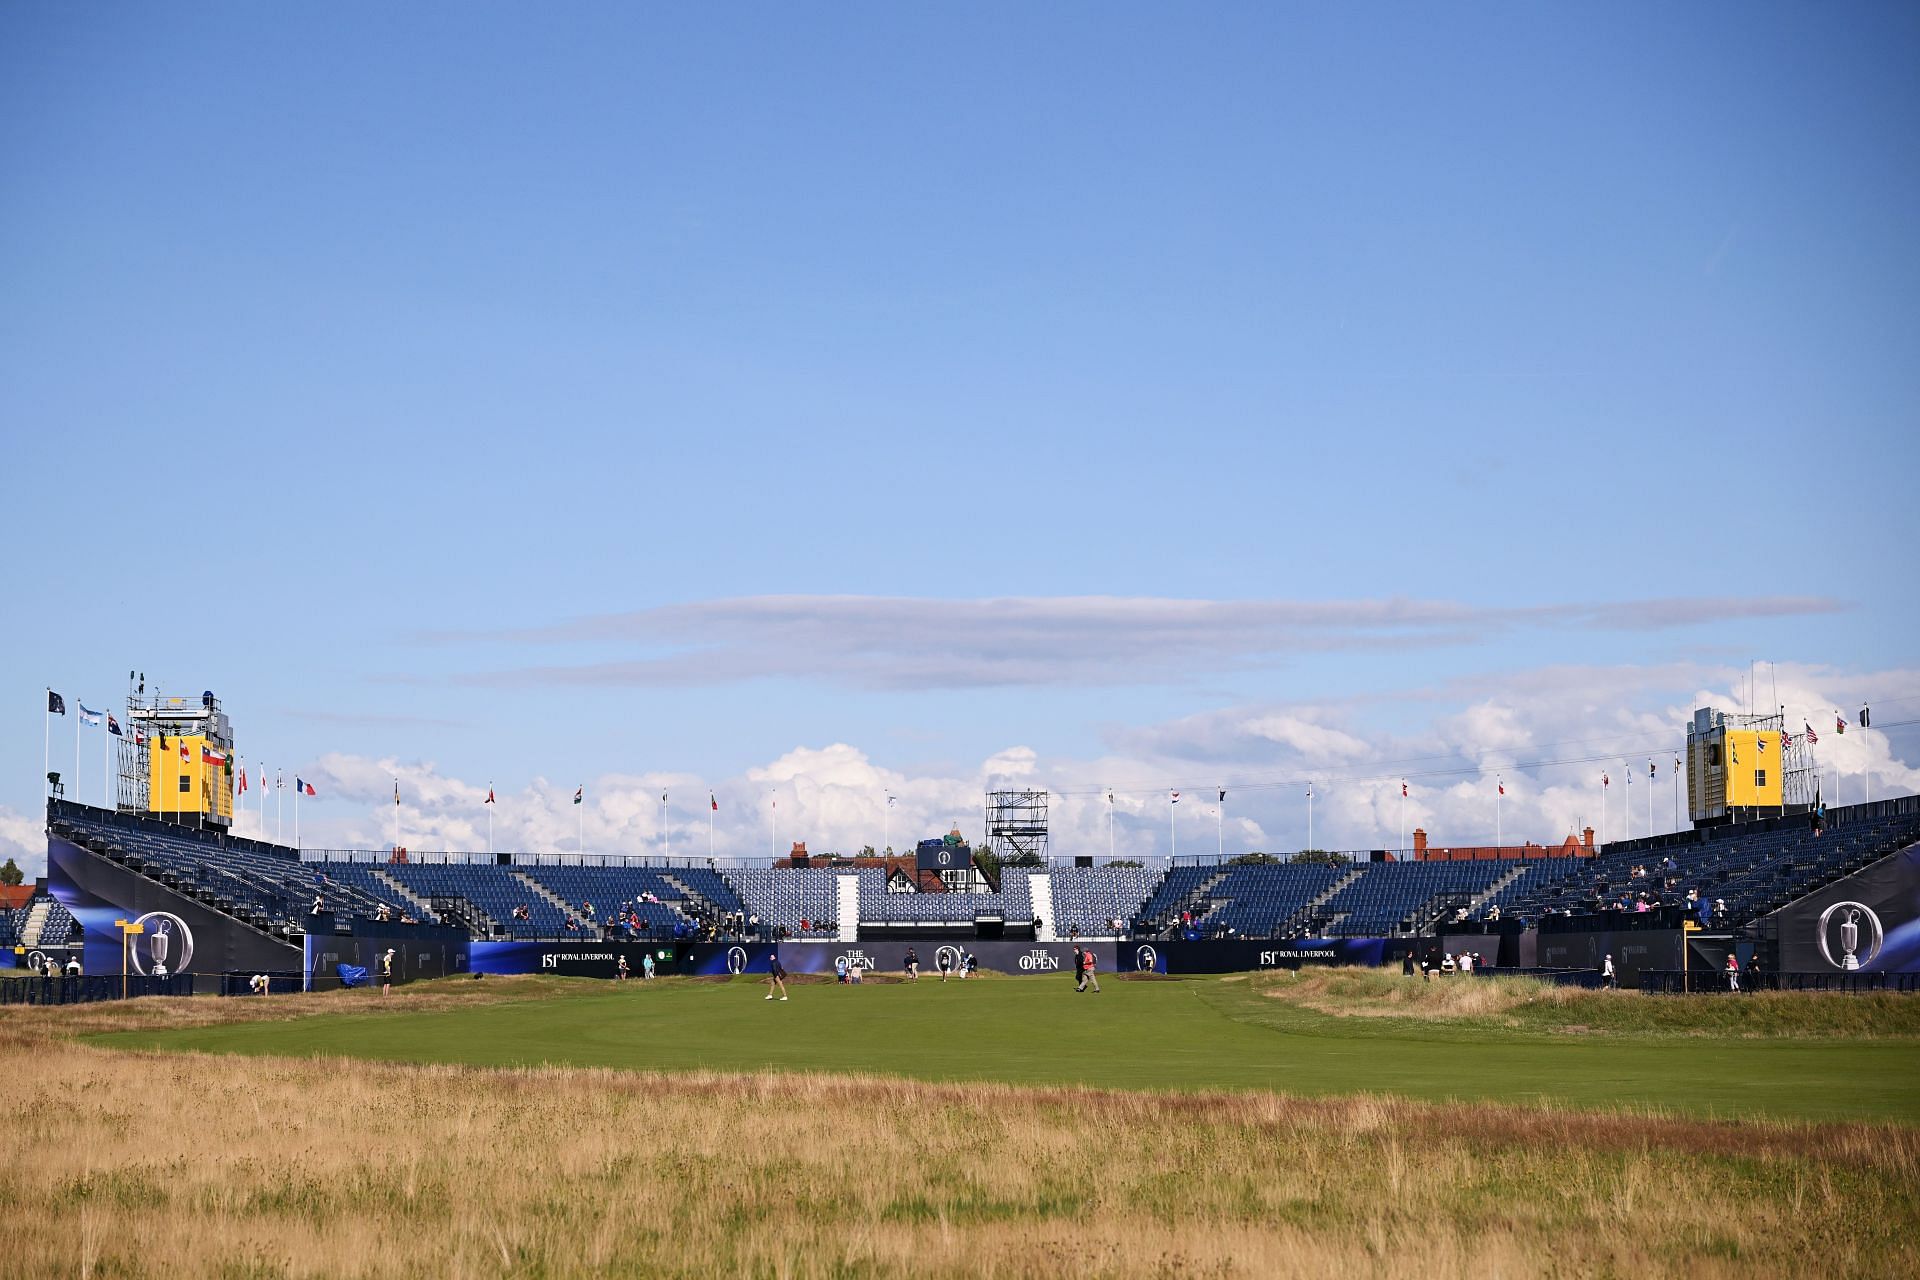 The 151st Open - Preview Day One